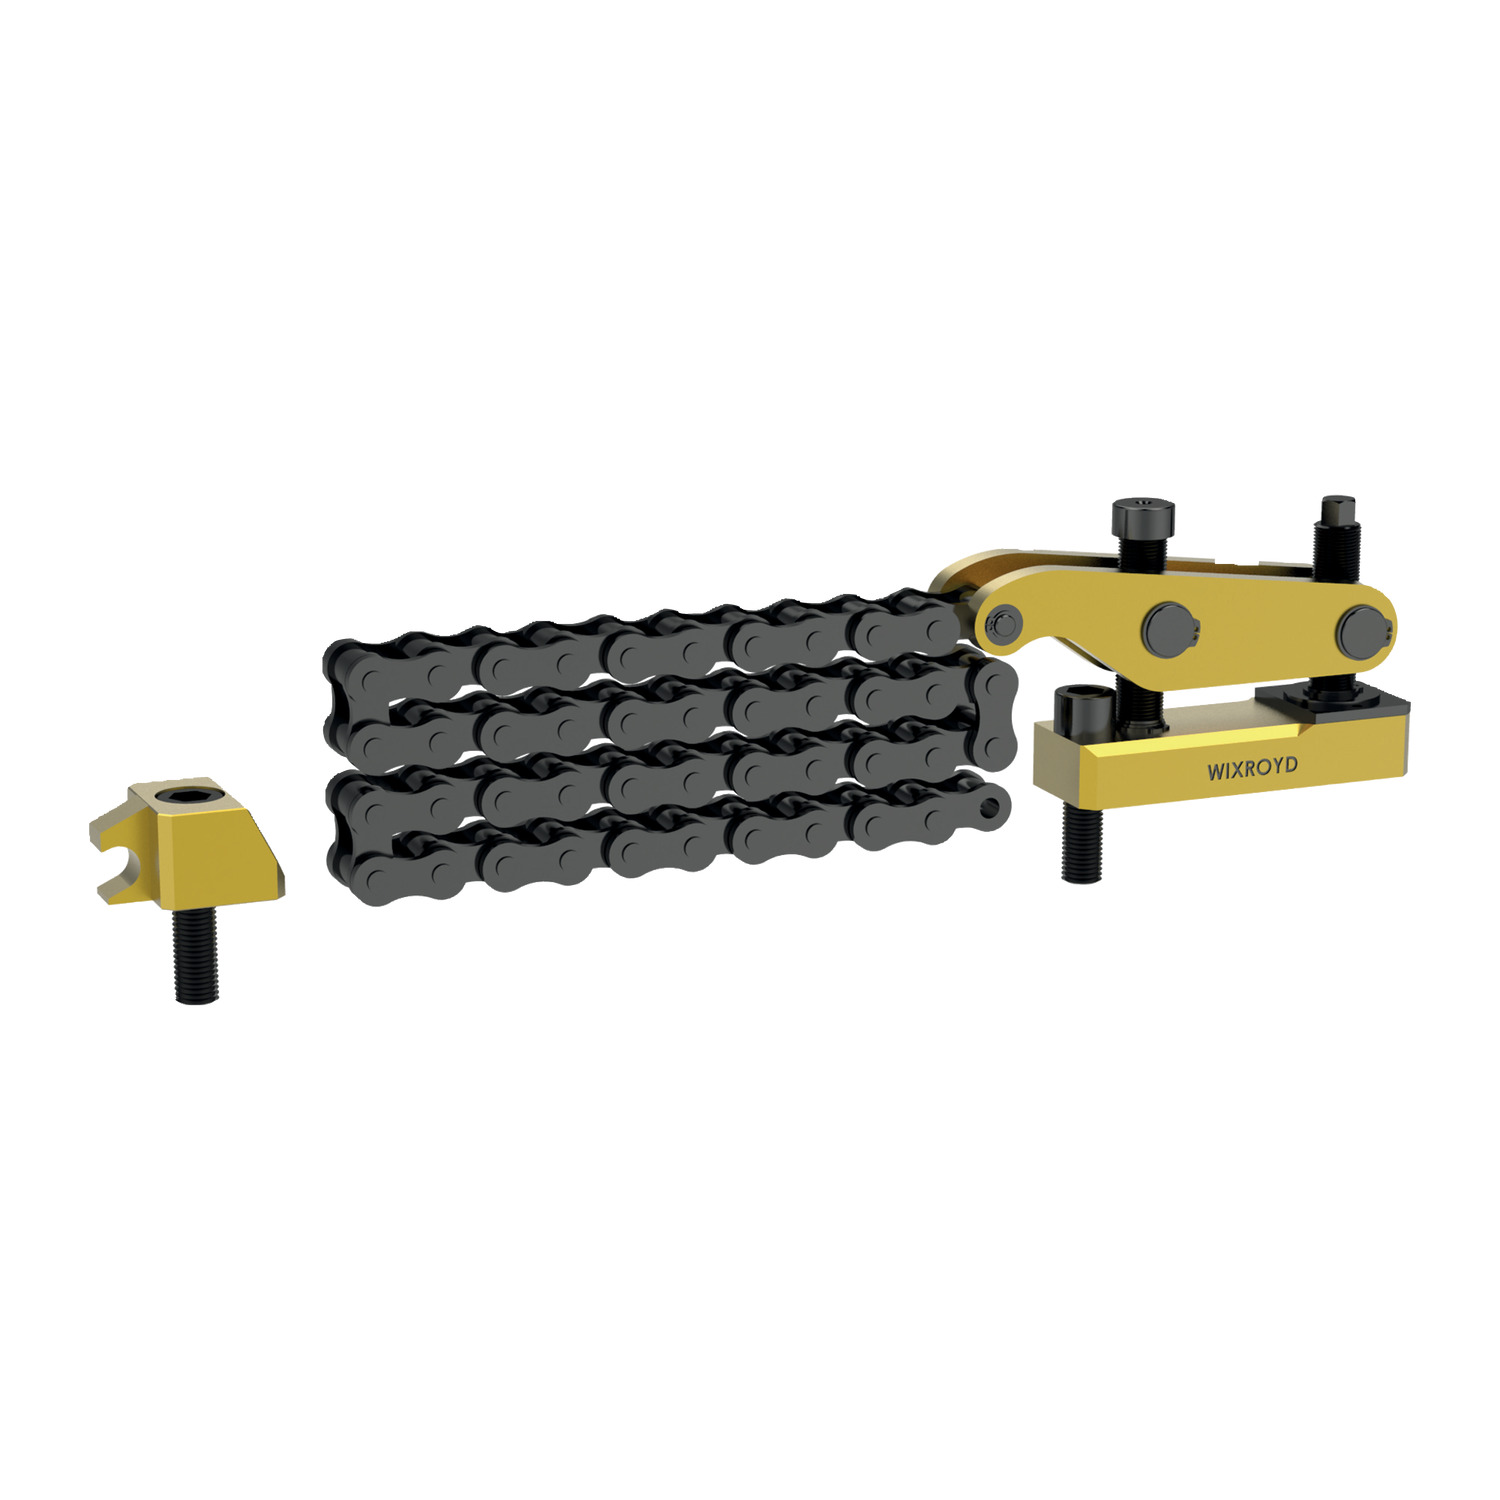 12752.W0001 Clamp, Chain 3m & Chain Anchor set of clamp, chain and anchor. Also known as CL2515.08-346